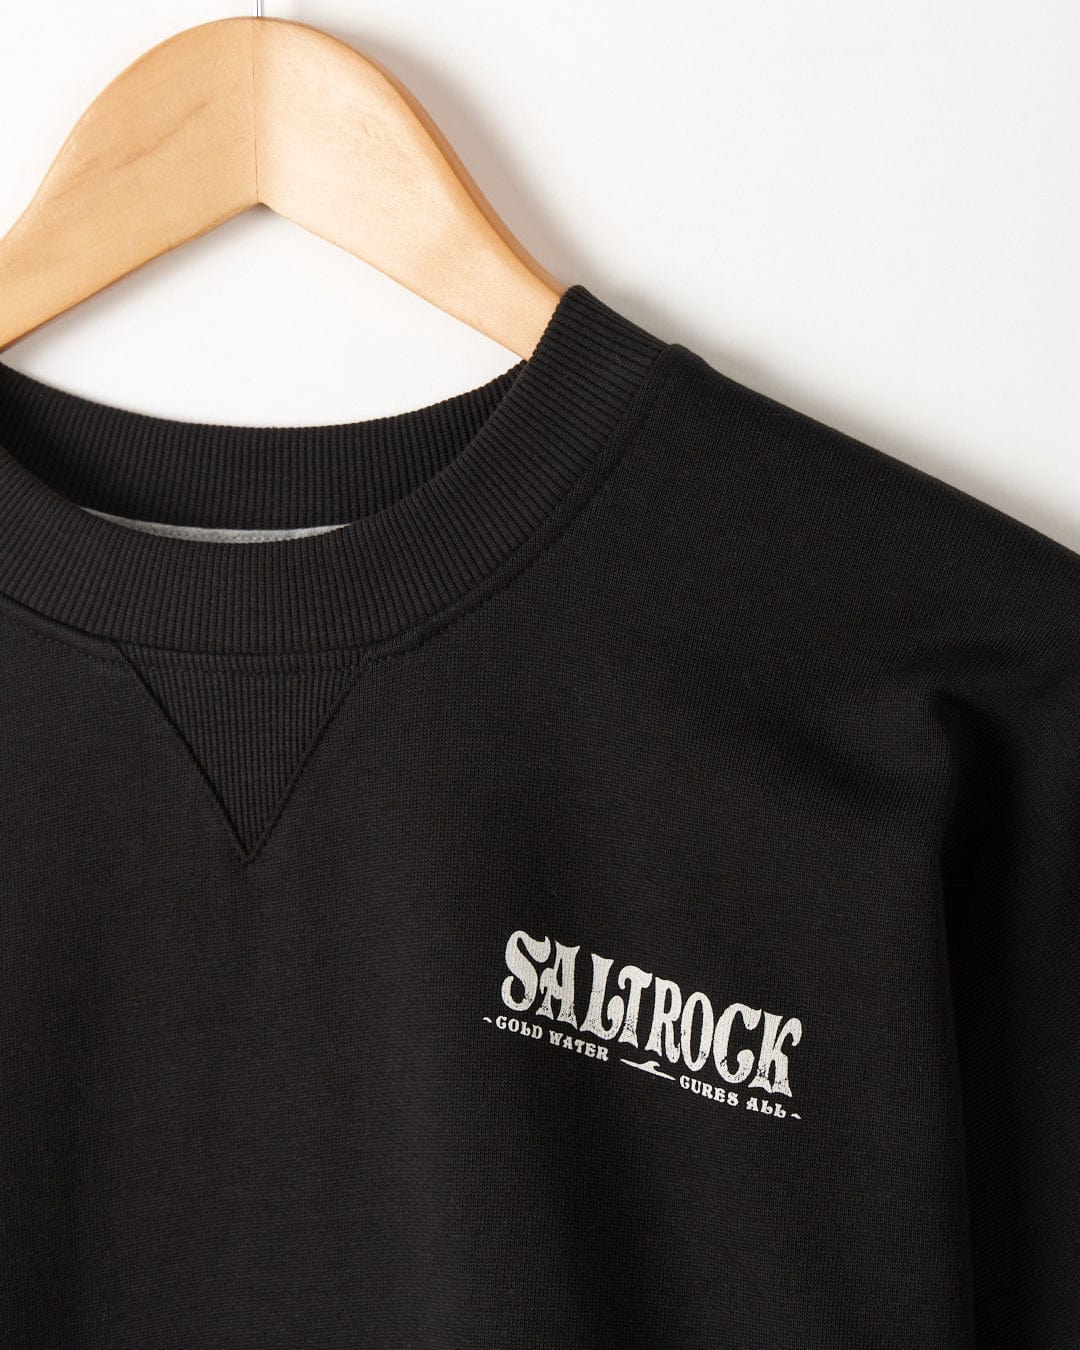 A Cold Water - Mens Sweat - Black featuring the branding of Saltrock.